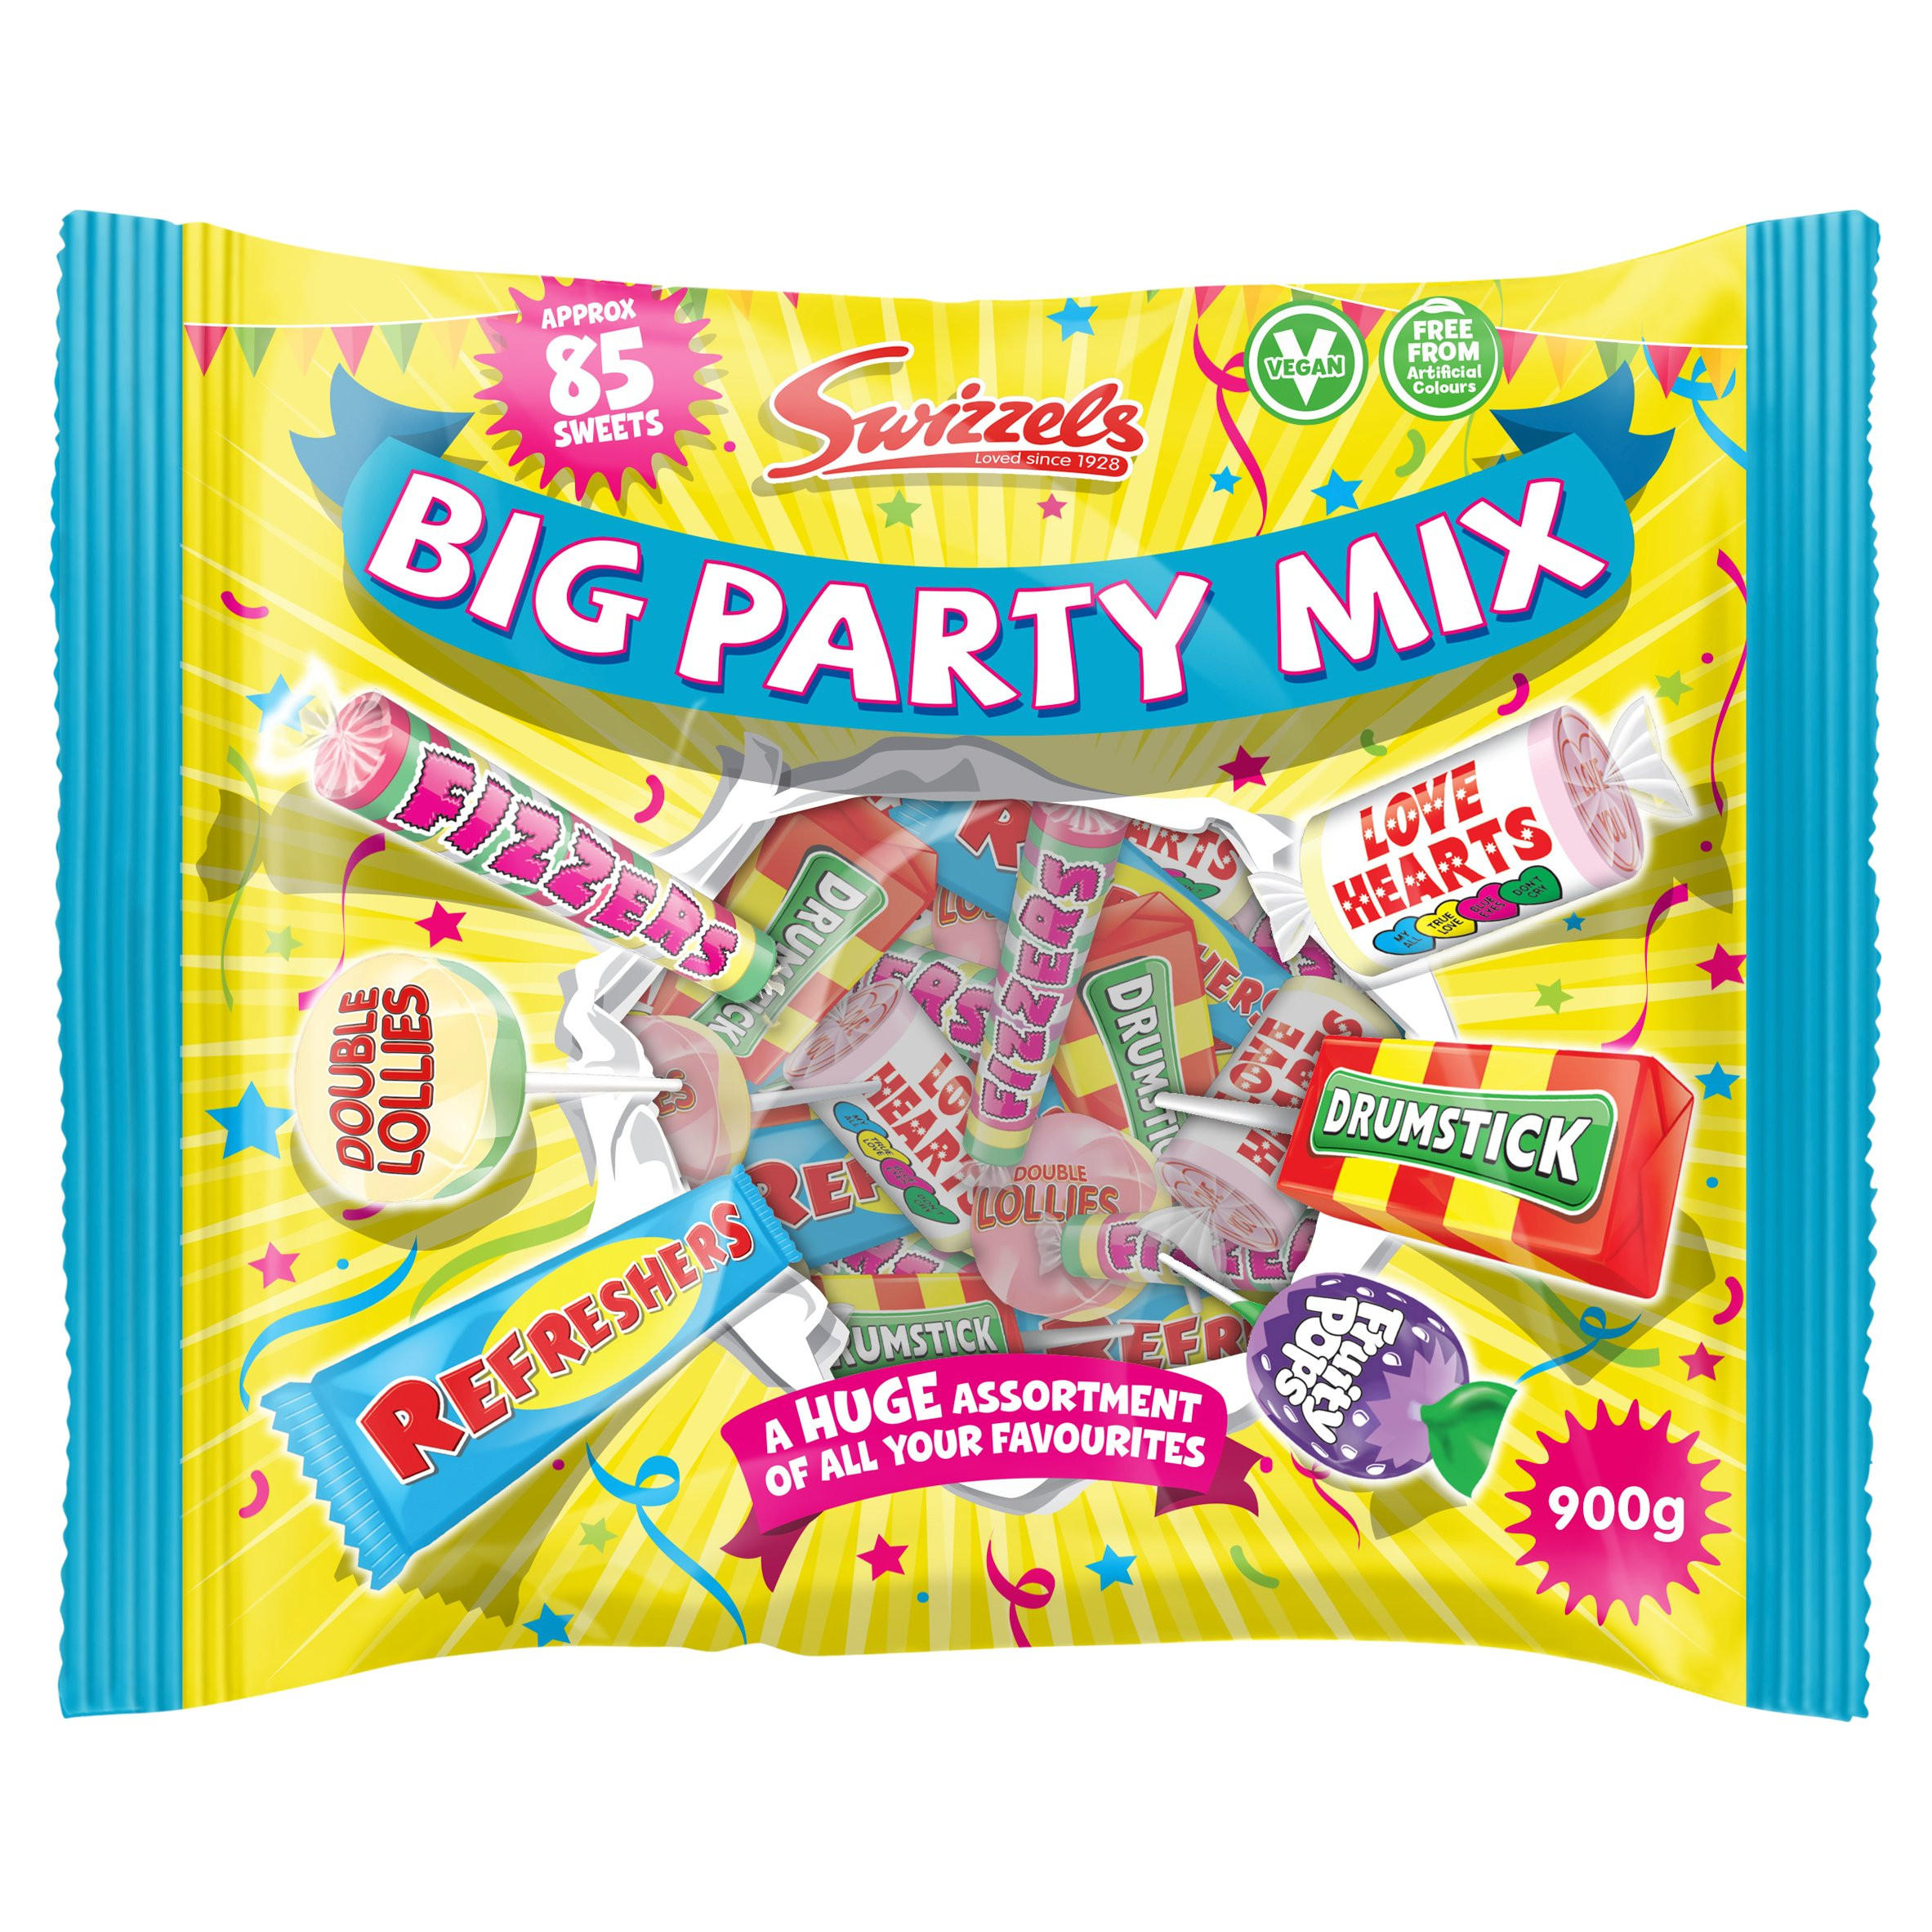 Swizzels Big Party Mix 900g, Sweets